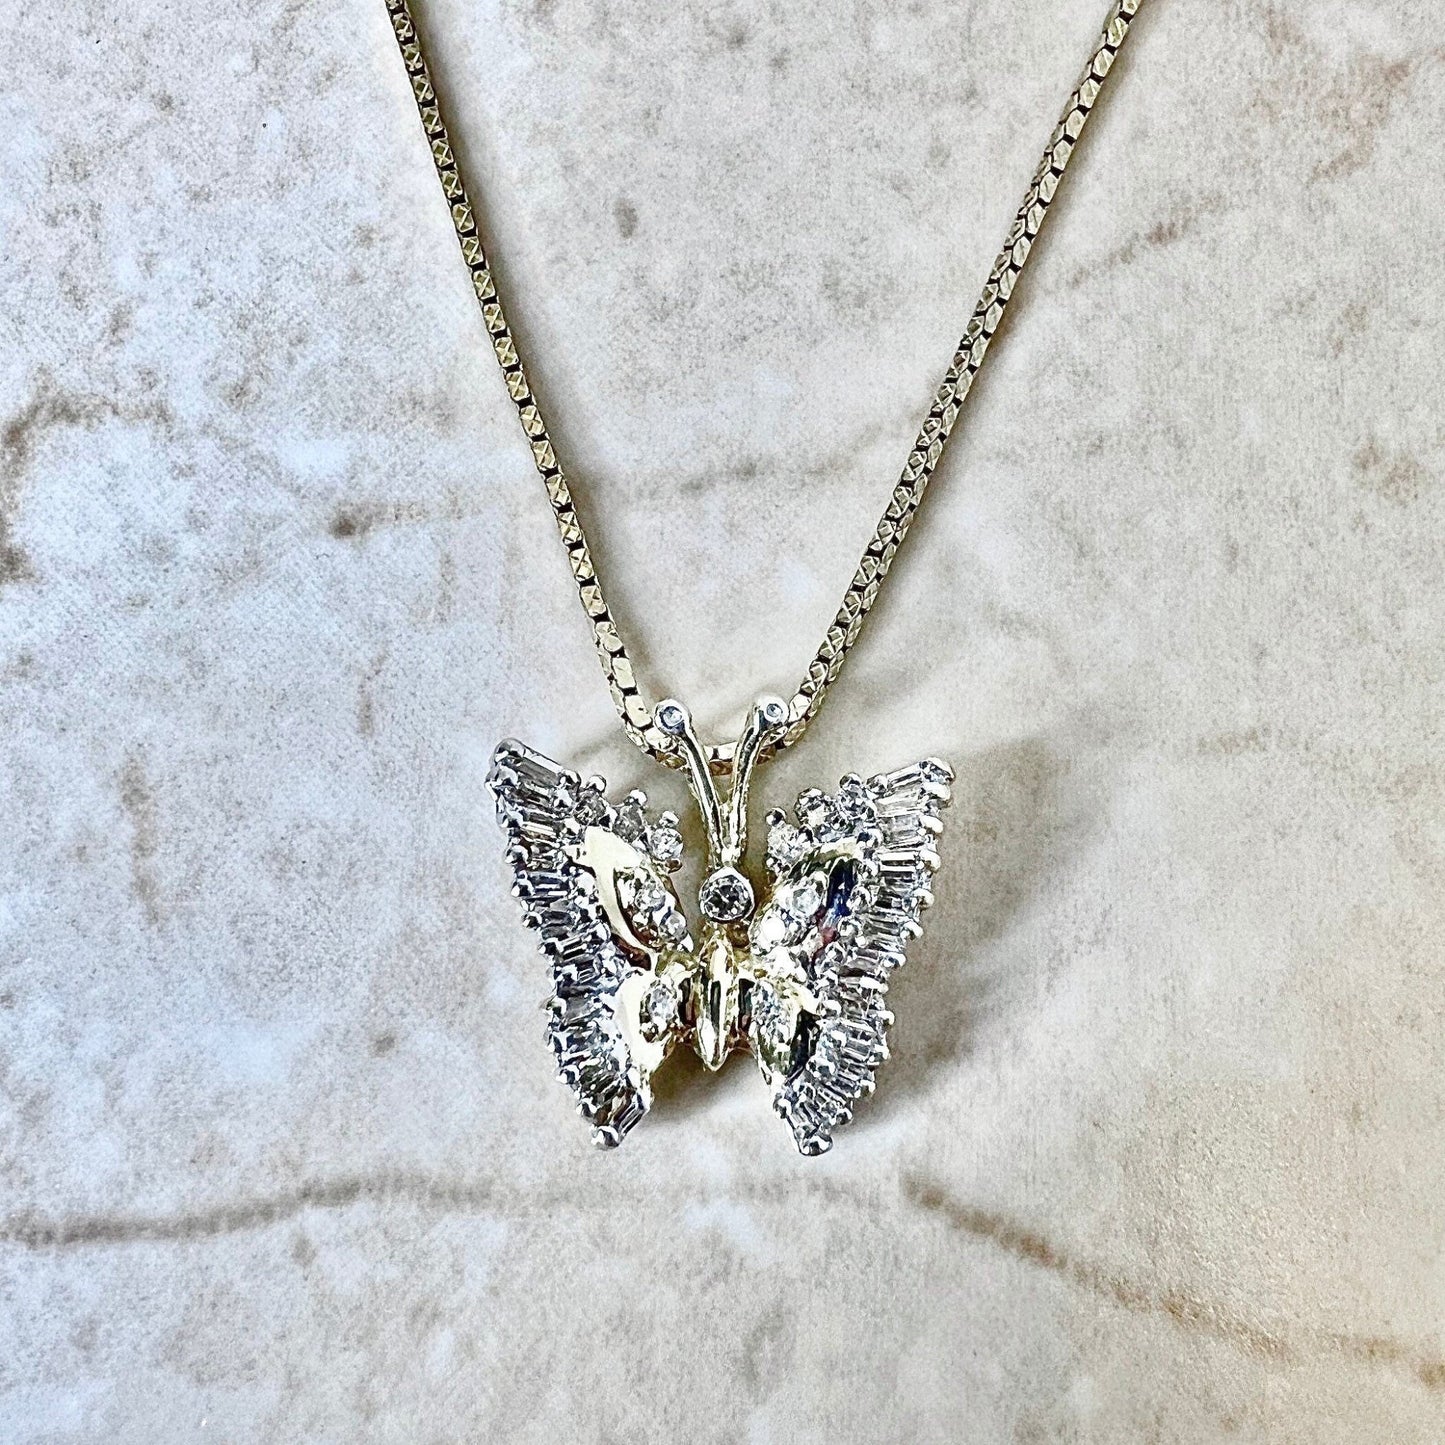 Vintage 14K Diamond Butterfly Pendant Necklace - Yellow & White Gold Insect Pendant - Diamond Necklace - Birthday Gift For Her